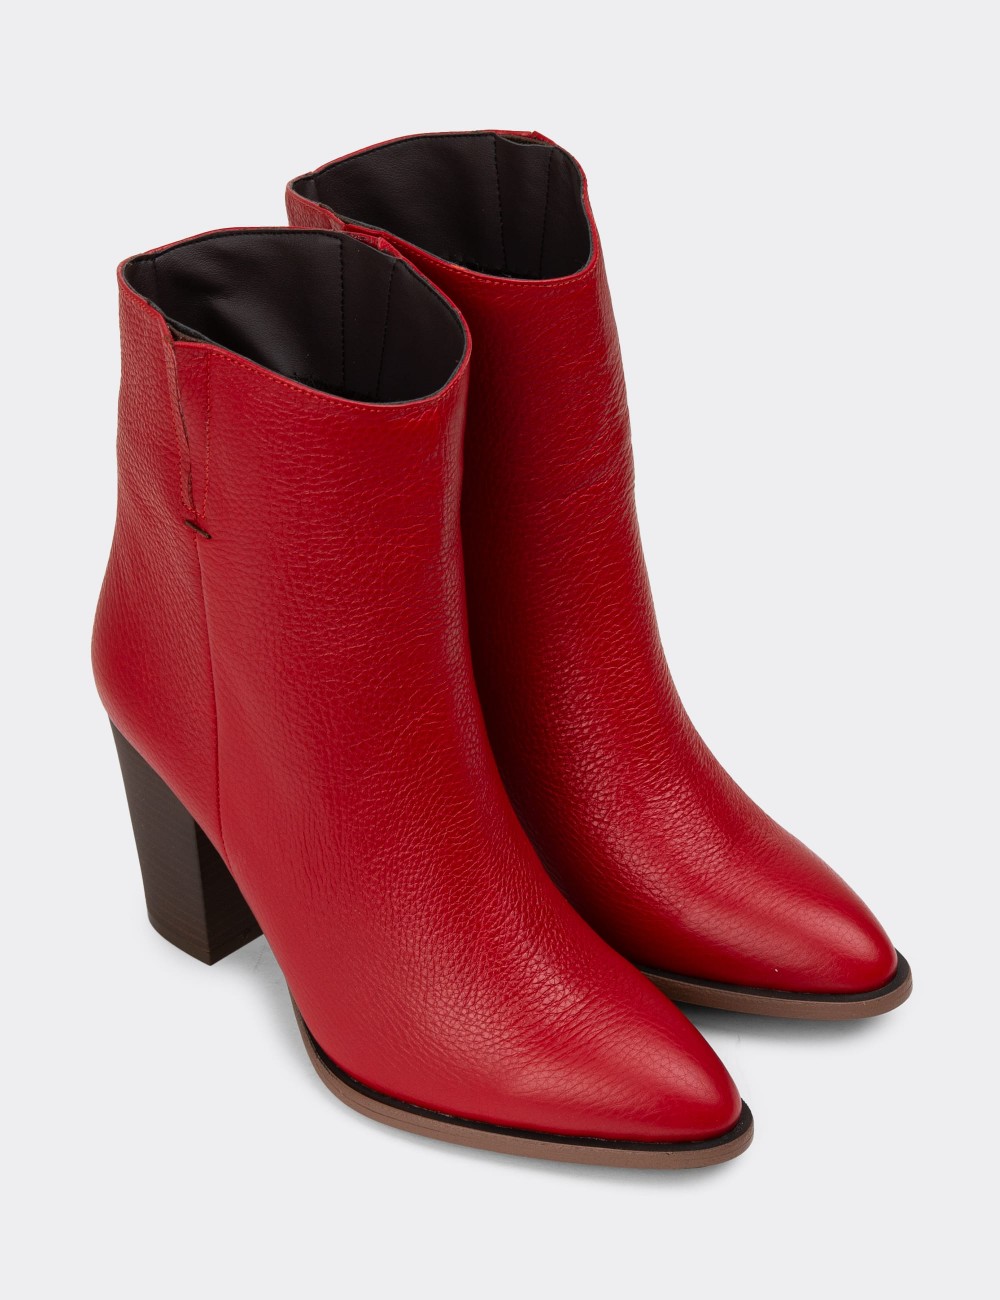 Red Leather Boots - E4452ZKRMC01